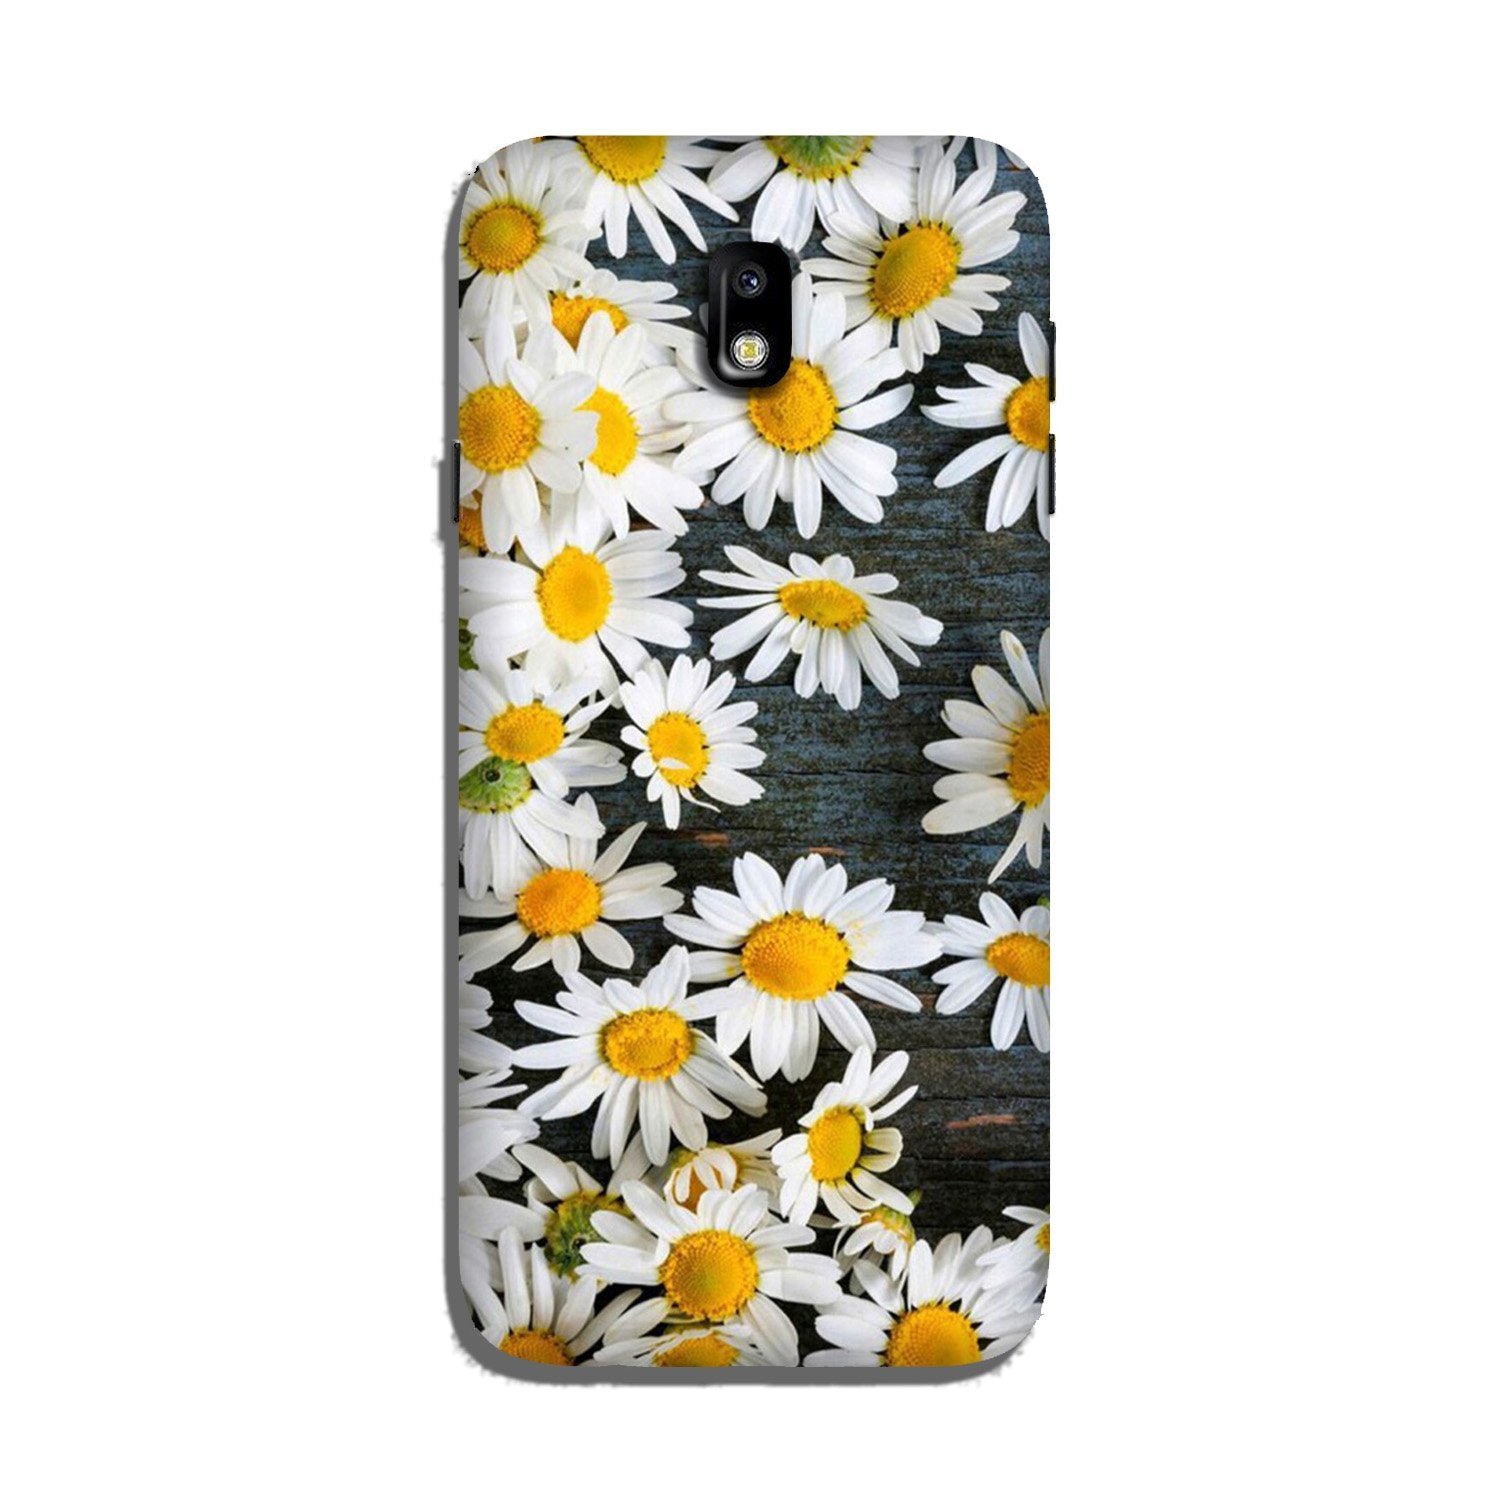 White flowers2 Case for Galaxy J7 Pro